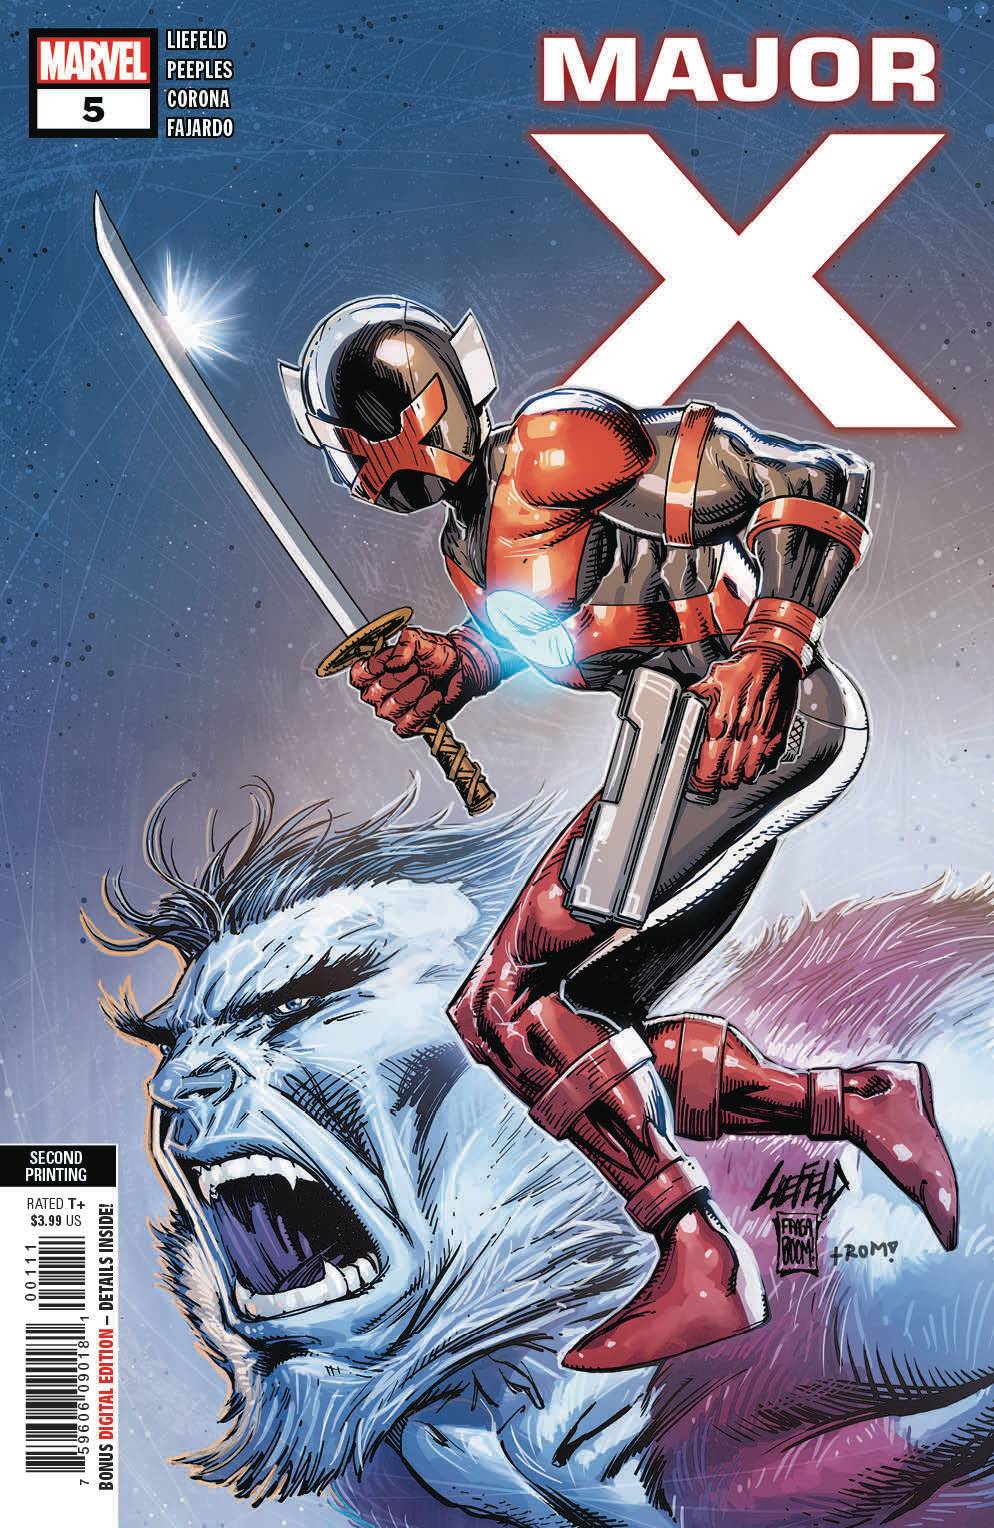 MAJOR X #5 (OF 6) 2nd Print Rob Liefeld Variant (07/24/2019) MARVEL